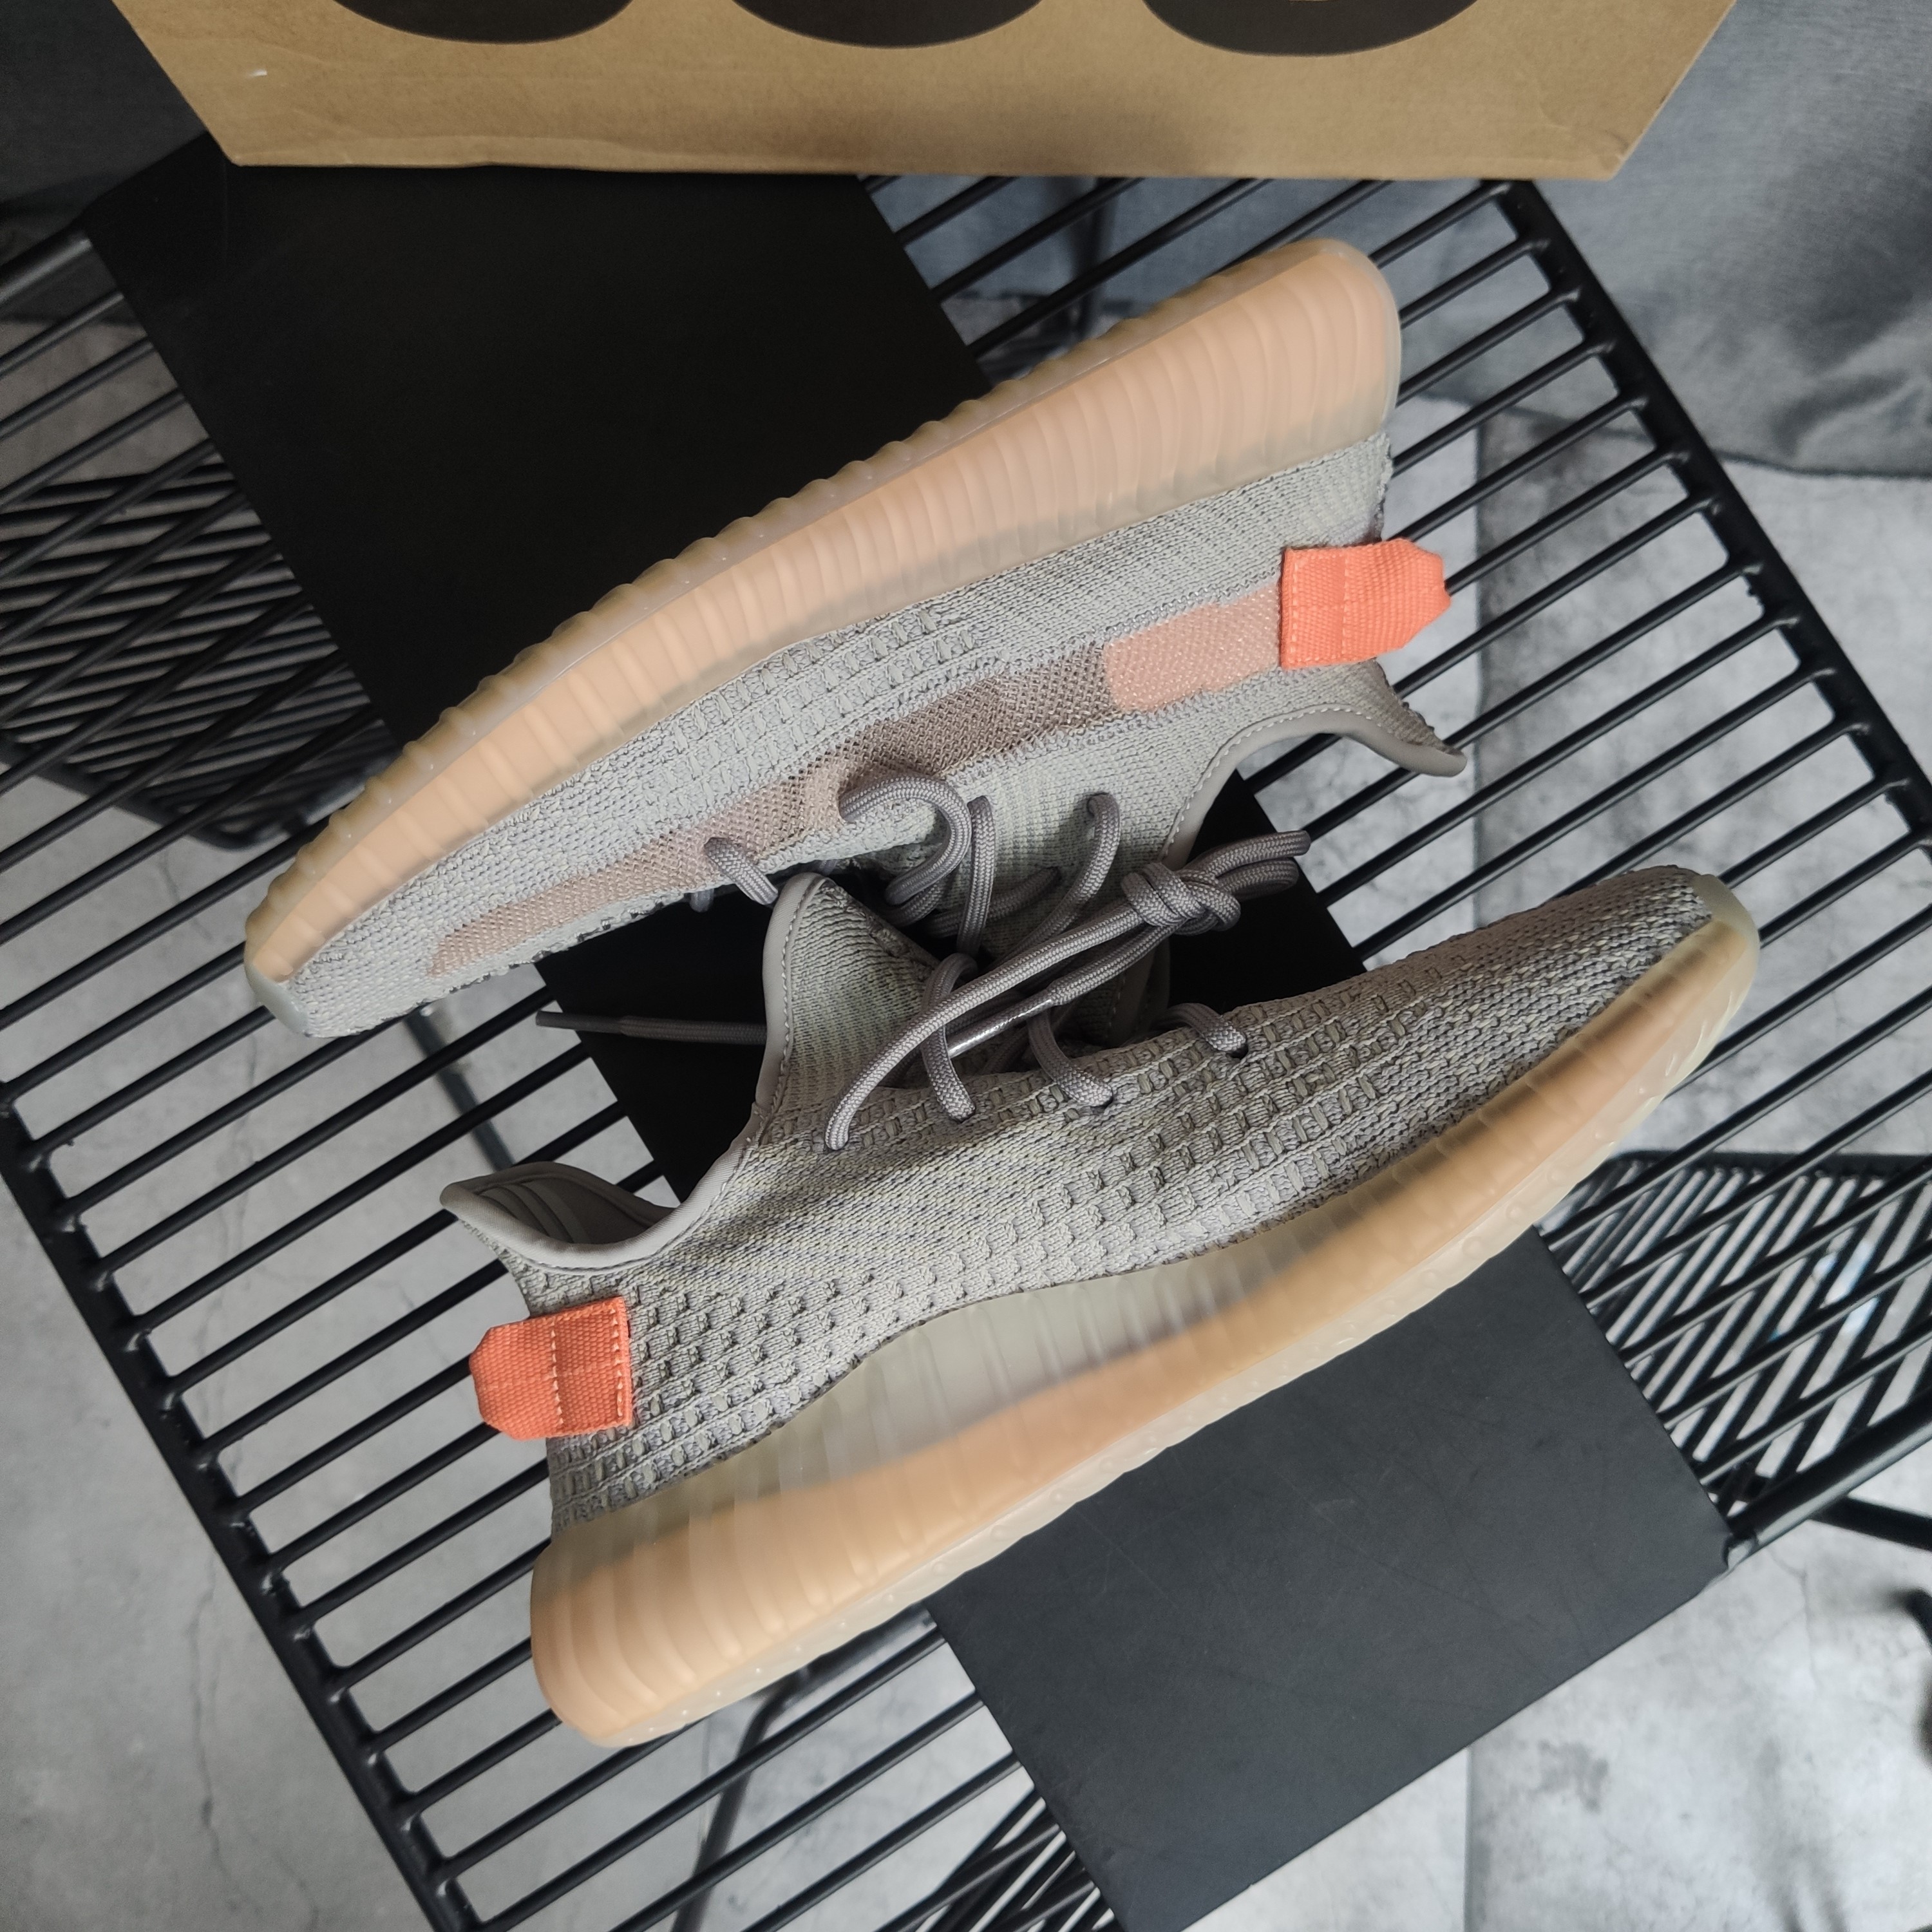 Adidas Yeezy Boost 350 V2 kanye West Trfrm Perfect Quality Sneakers MS09216 Updated in 2019.05.25